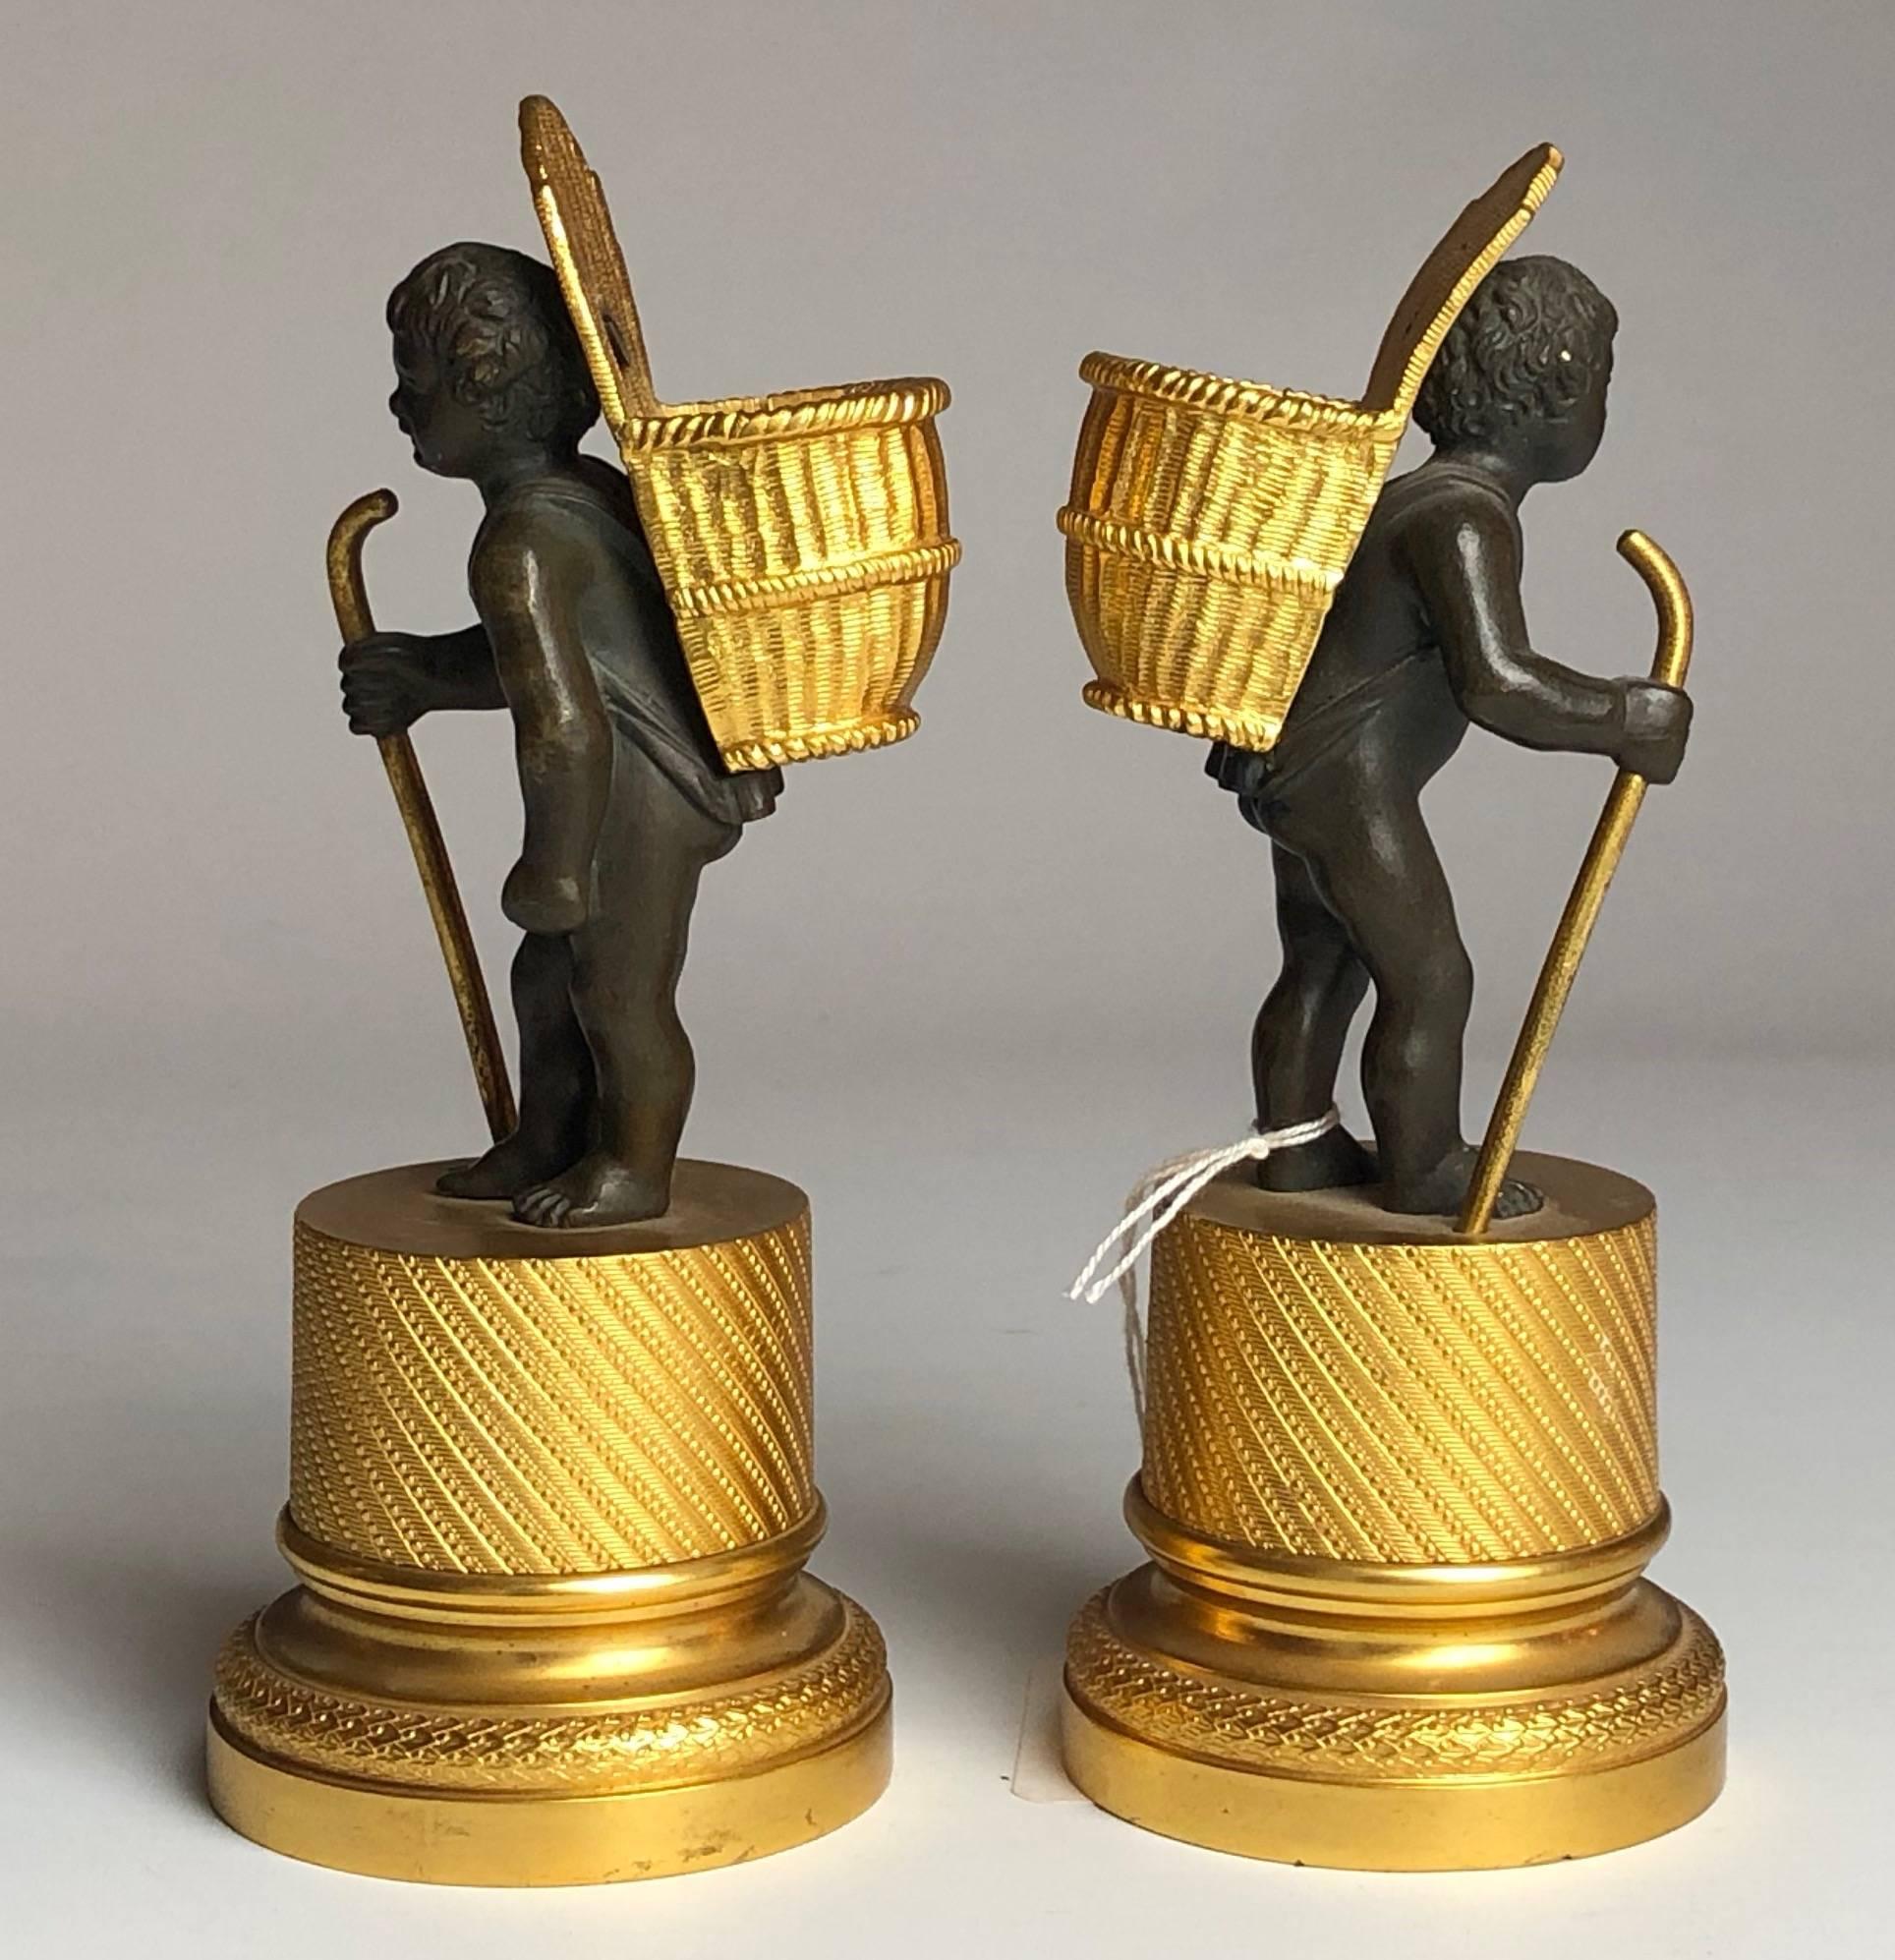 A good quality pair of French bronze and ormolu match strikers

France, circa 1830.

Measure: each one stands 5 1/2